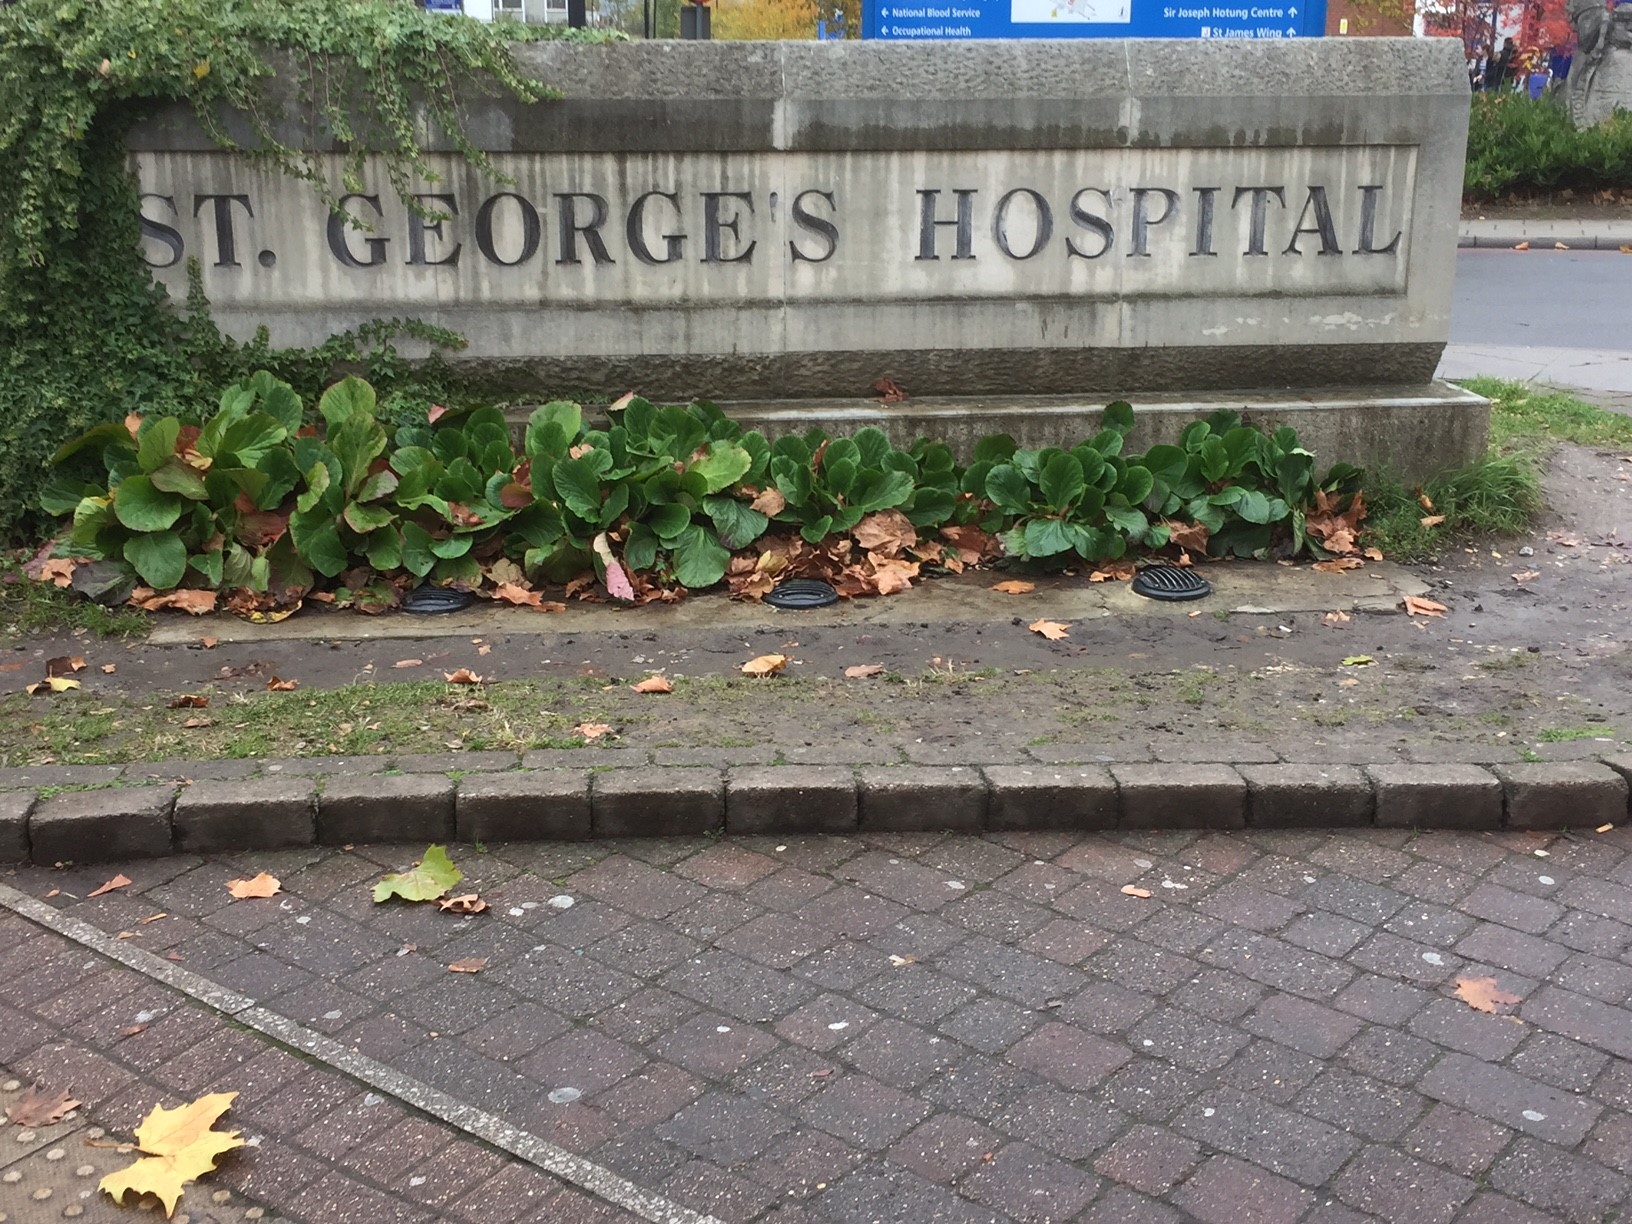 Welcome to St George's Hospital.